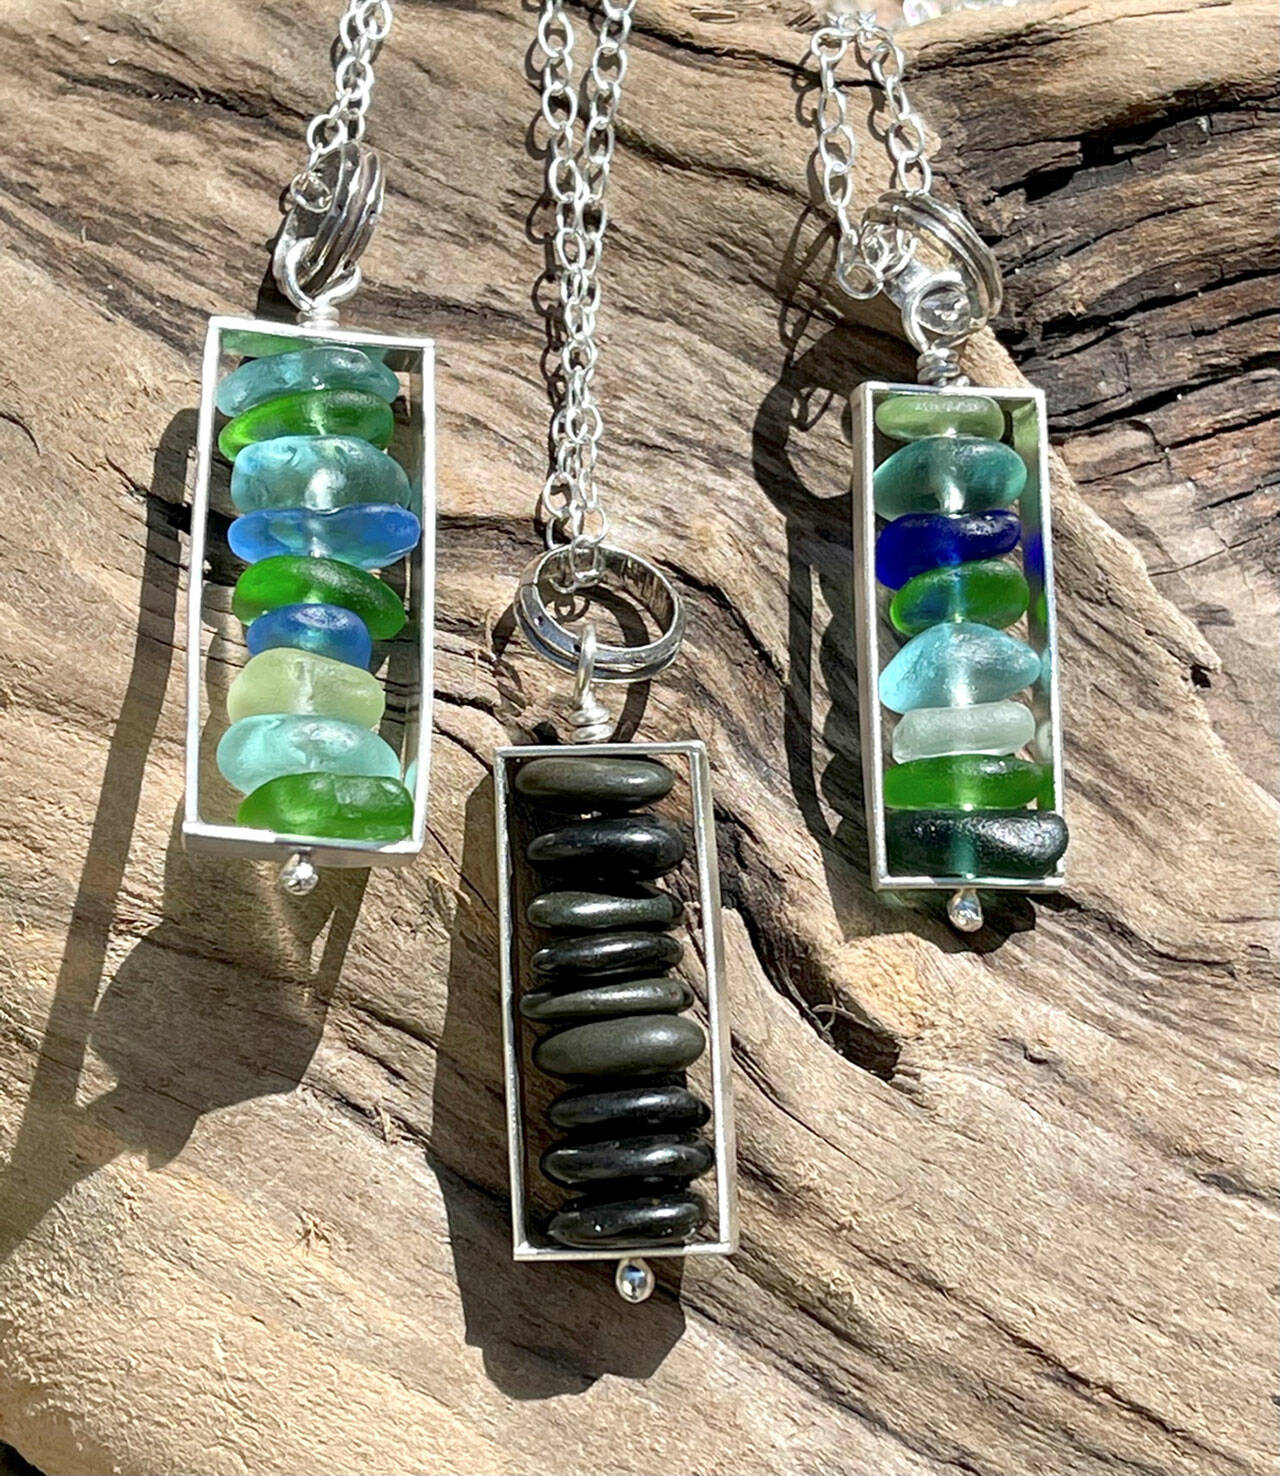 Jewelry by Andrea Guarino-Slemmons is exhibited at Port Townsend Gallery.